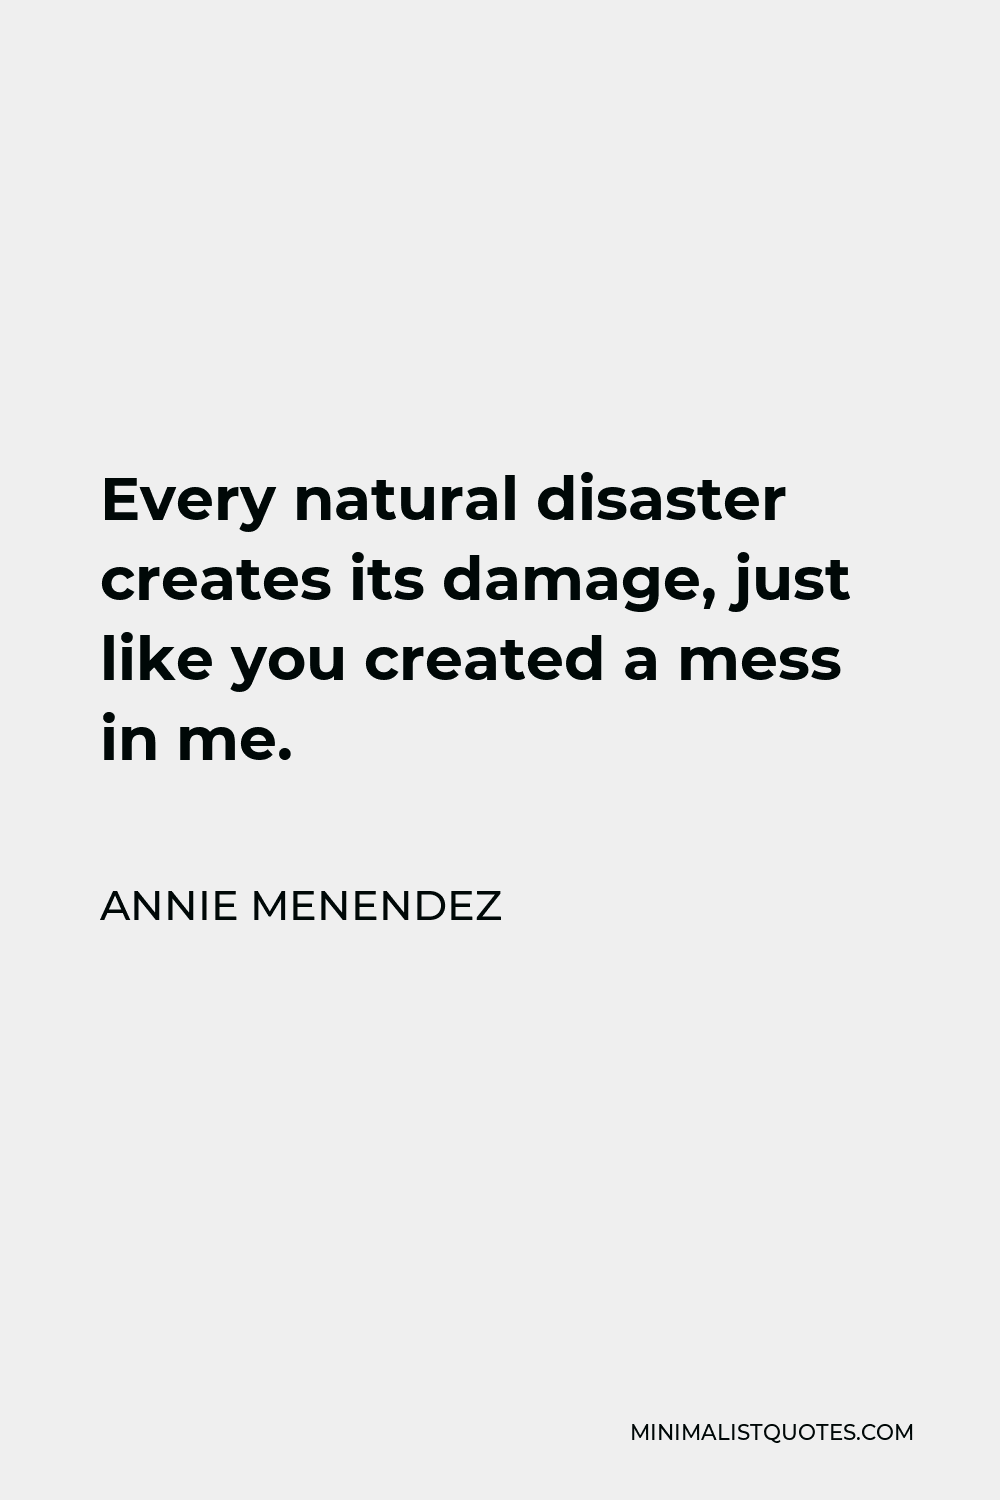 Annie Menendez Quote - Every natural disaster creates its damage, just like you created a mess in me.